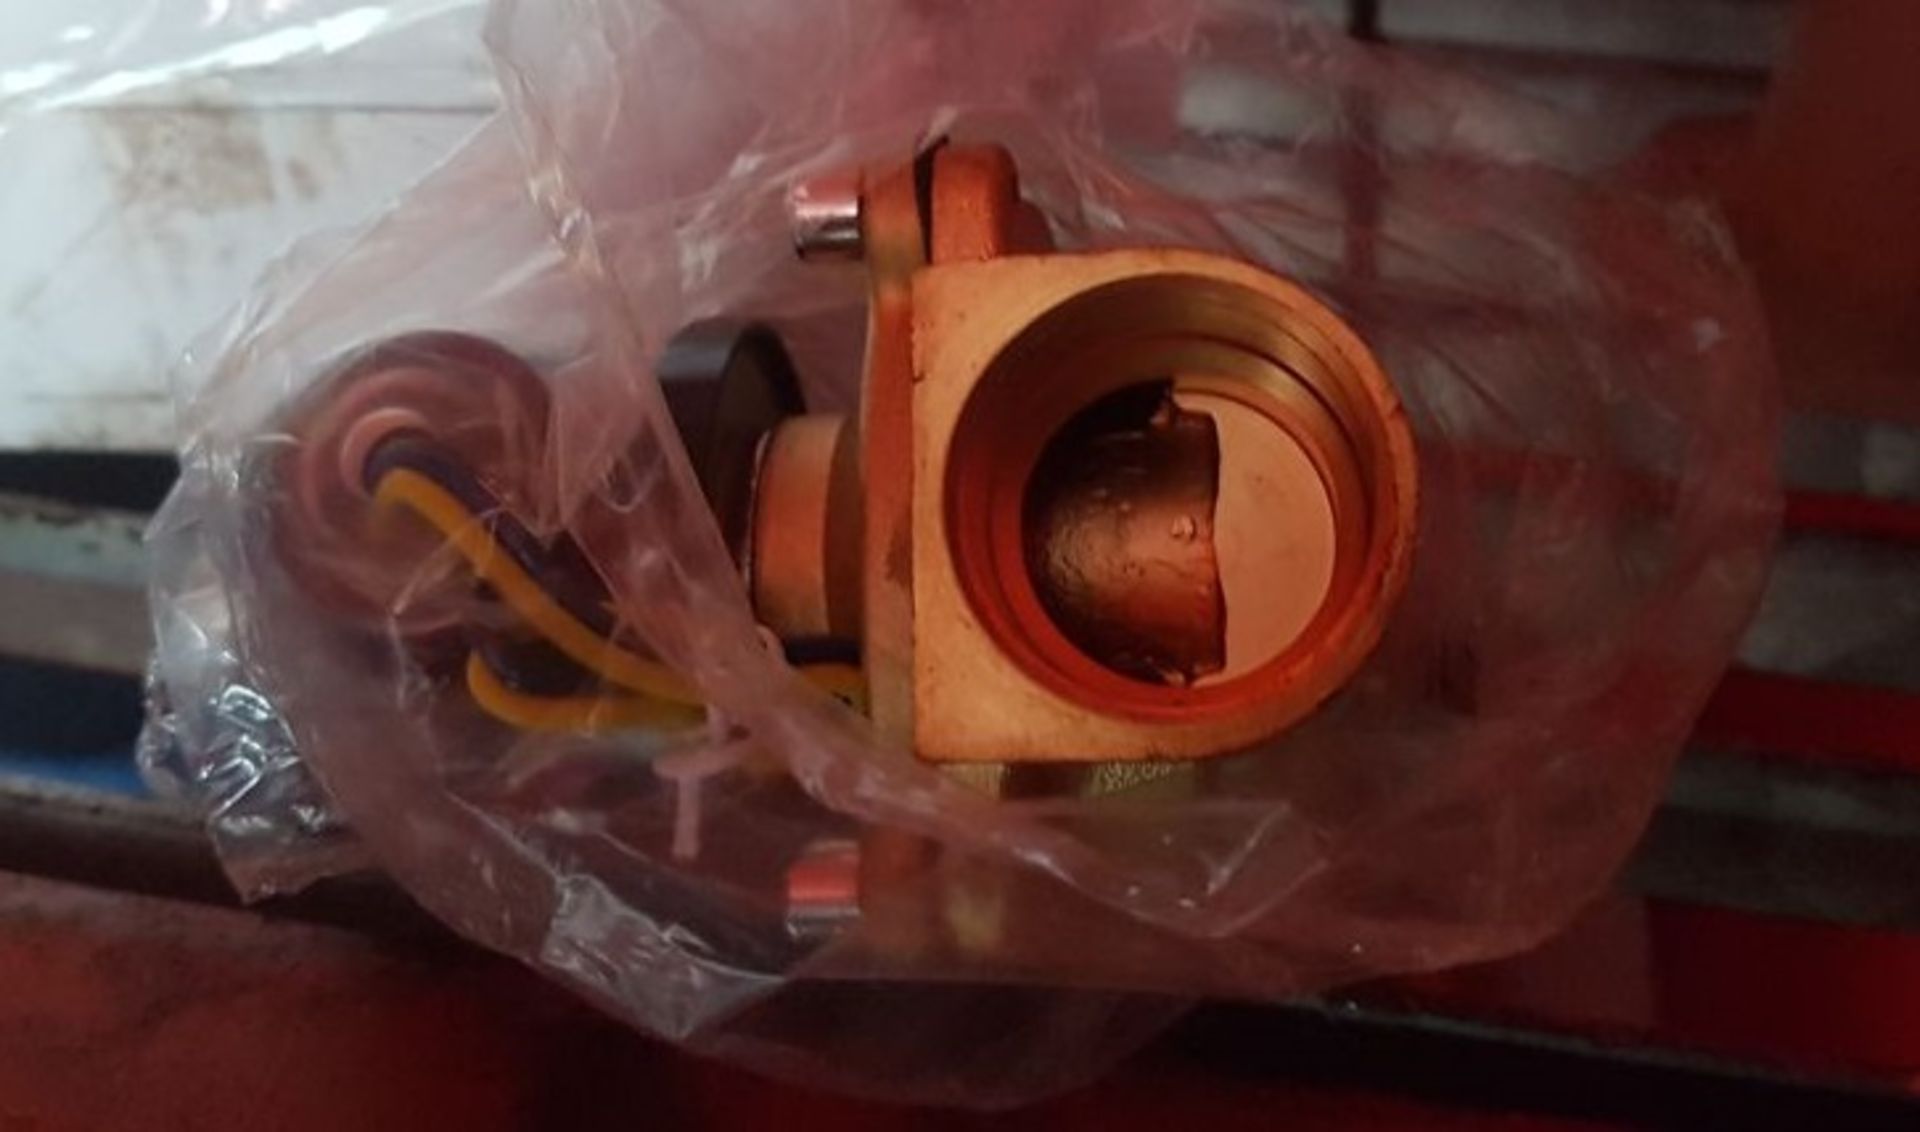 BACO Engineering 1"" 25mm machined solid brass solenoid valve - Image 2 of 4